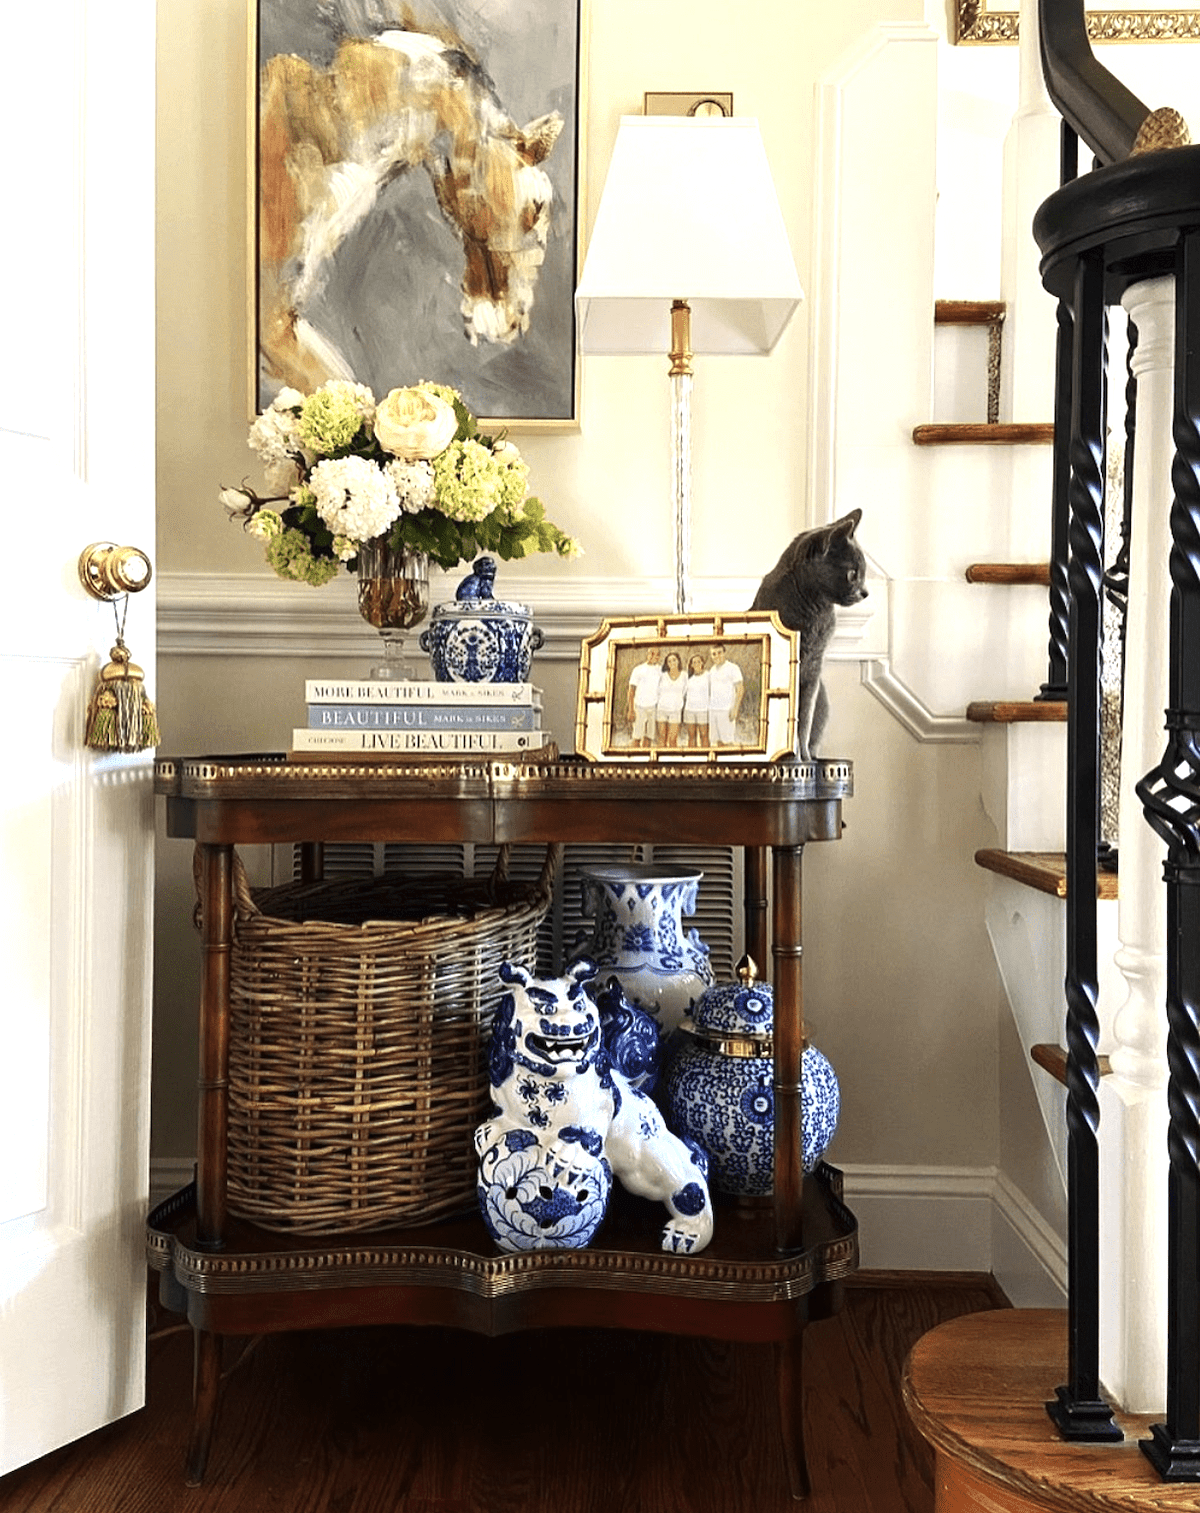 3 Fabulously French Home Tours Today! French Country Fridays 322